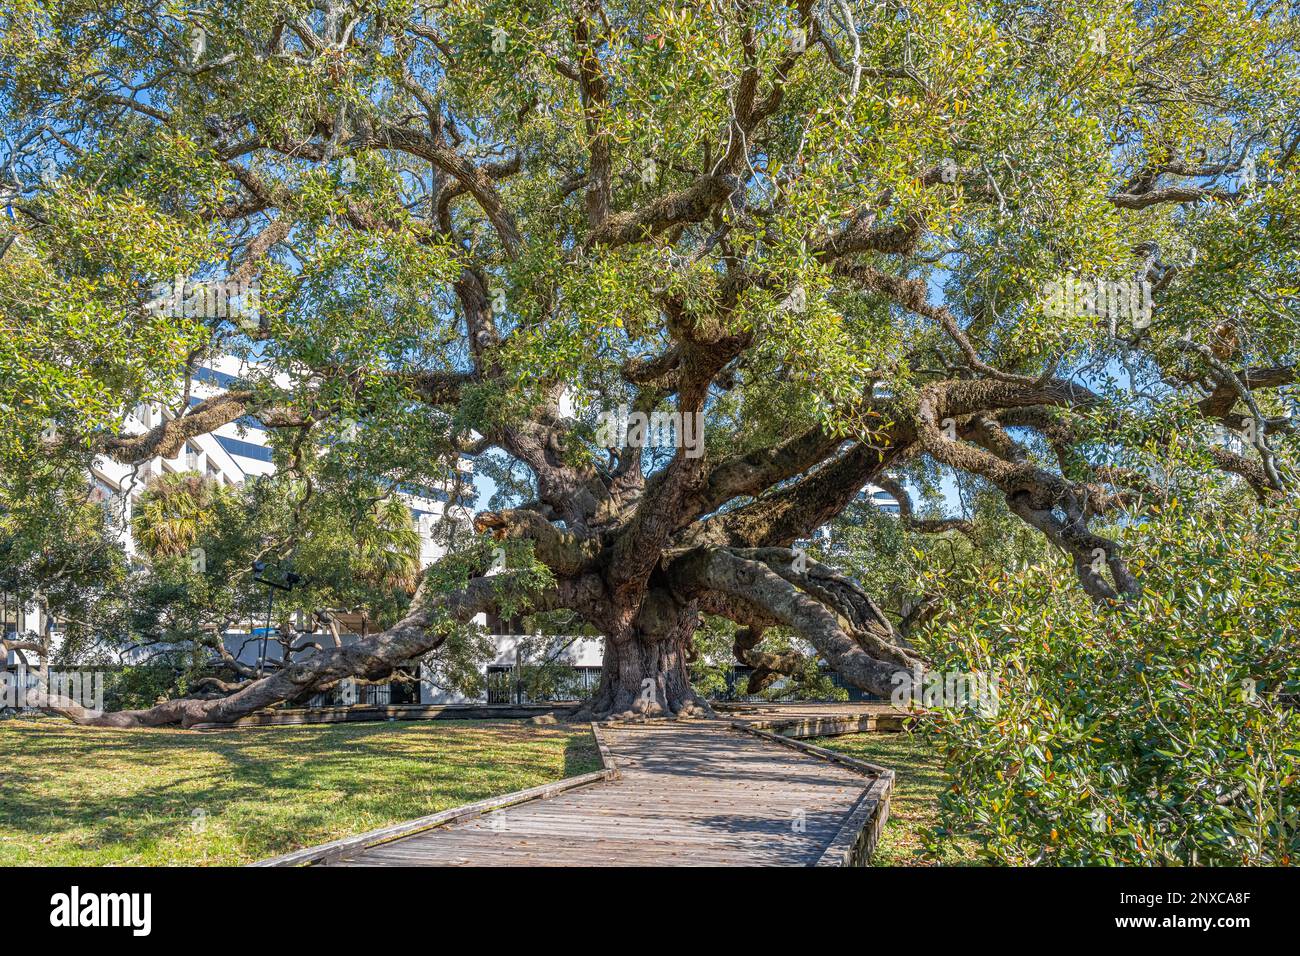 Treaty Oak, a massive and ancient Florida live oak tree at Jessie Ball duPont Park in downtown Jacksonville, Florida. (USA) Stock Photo